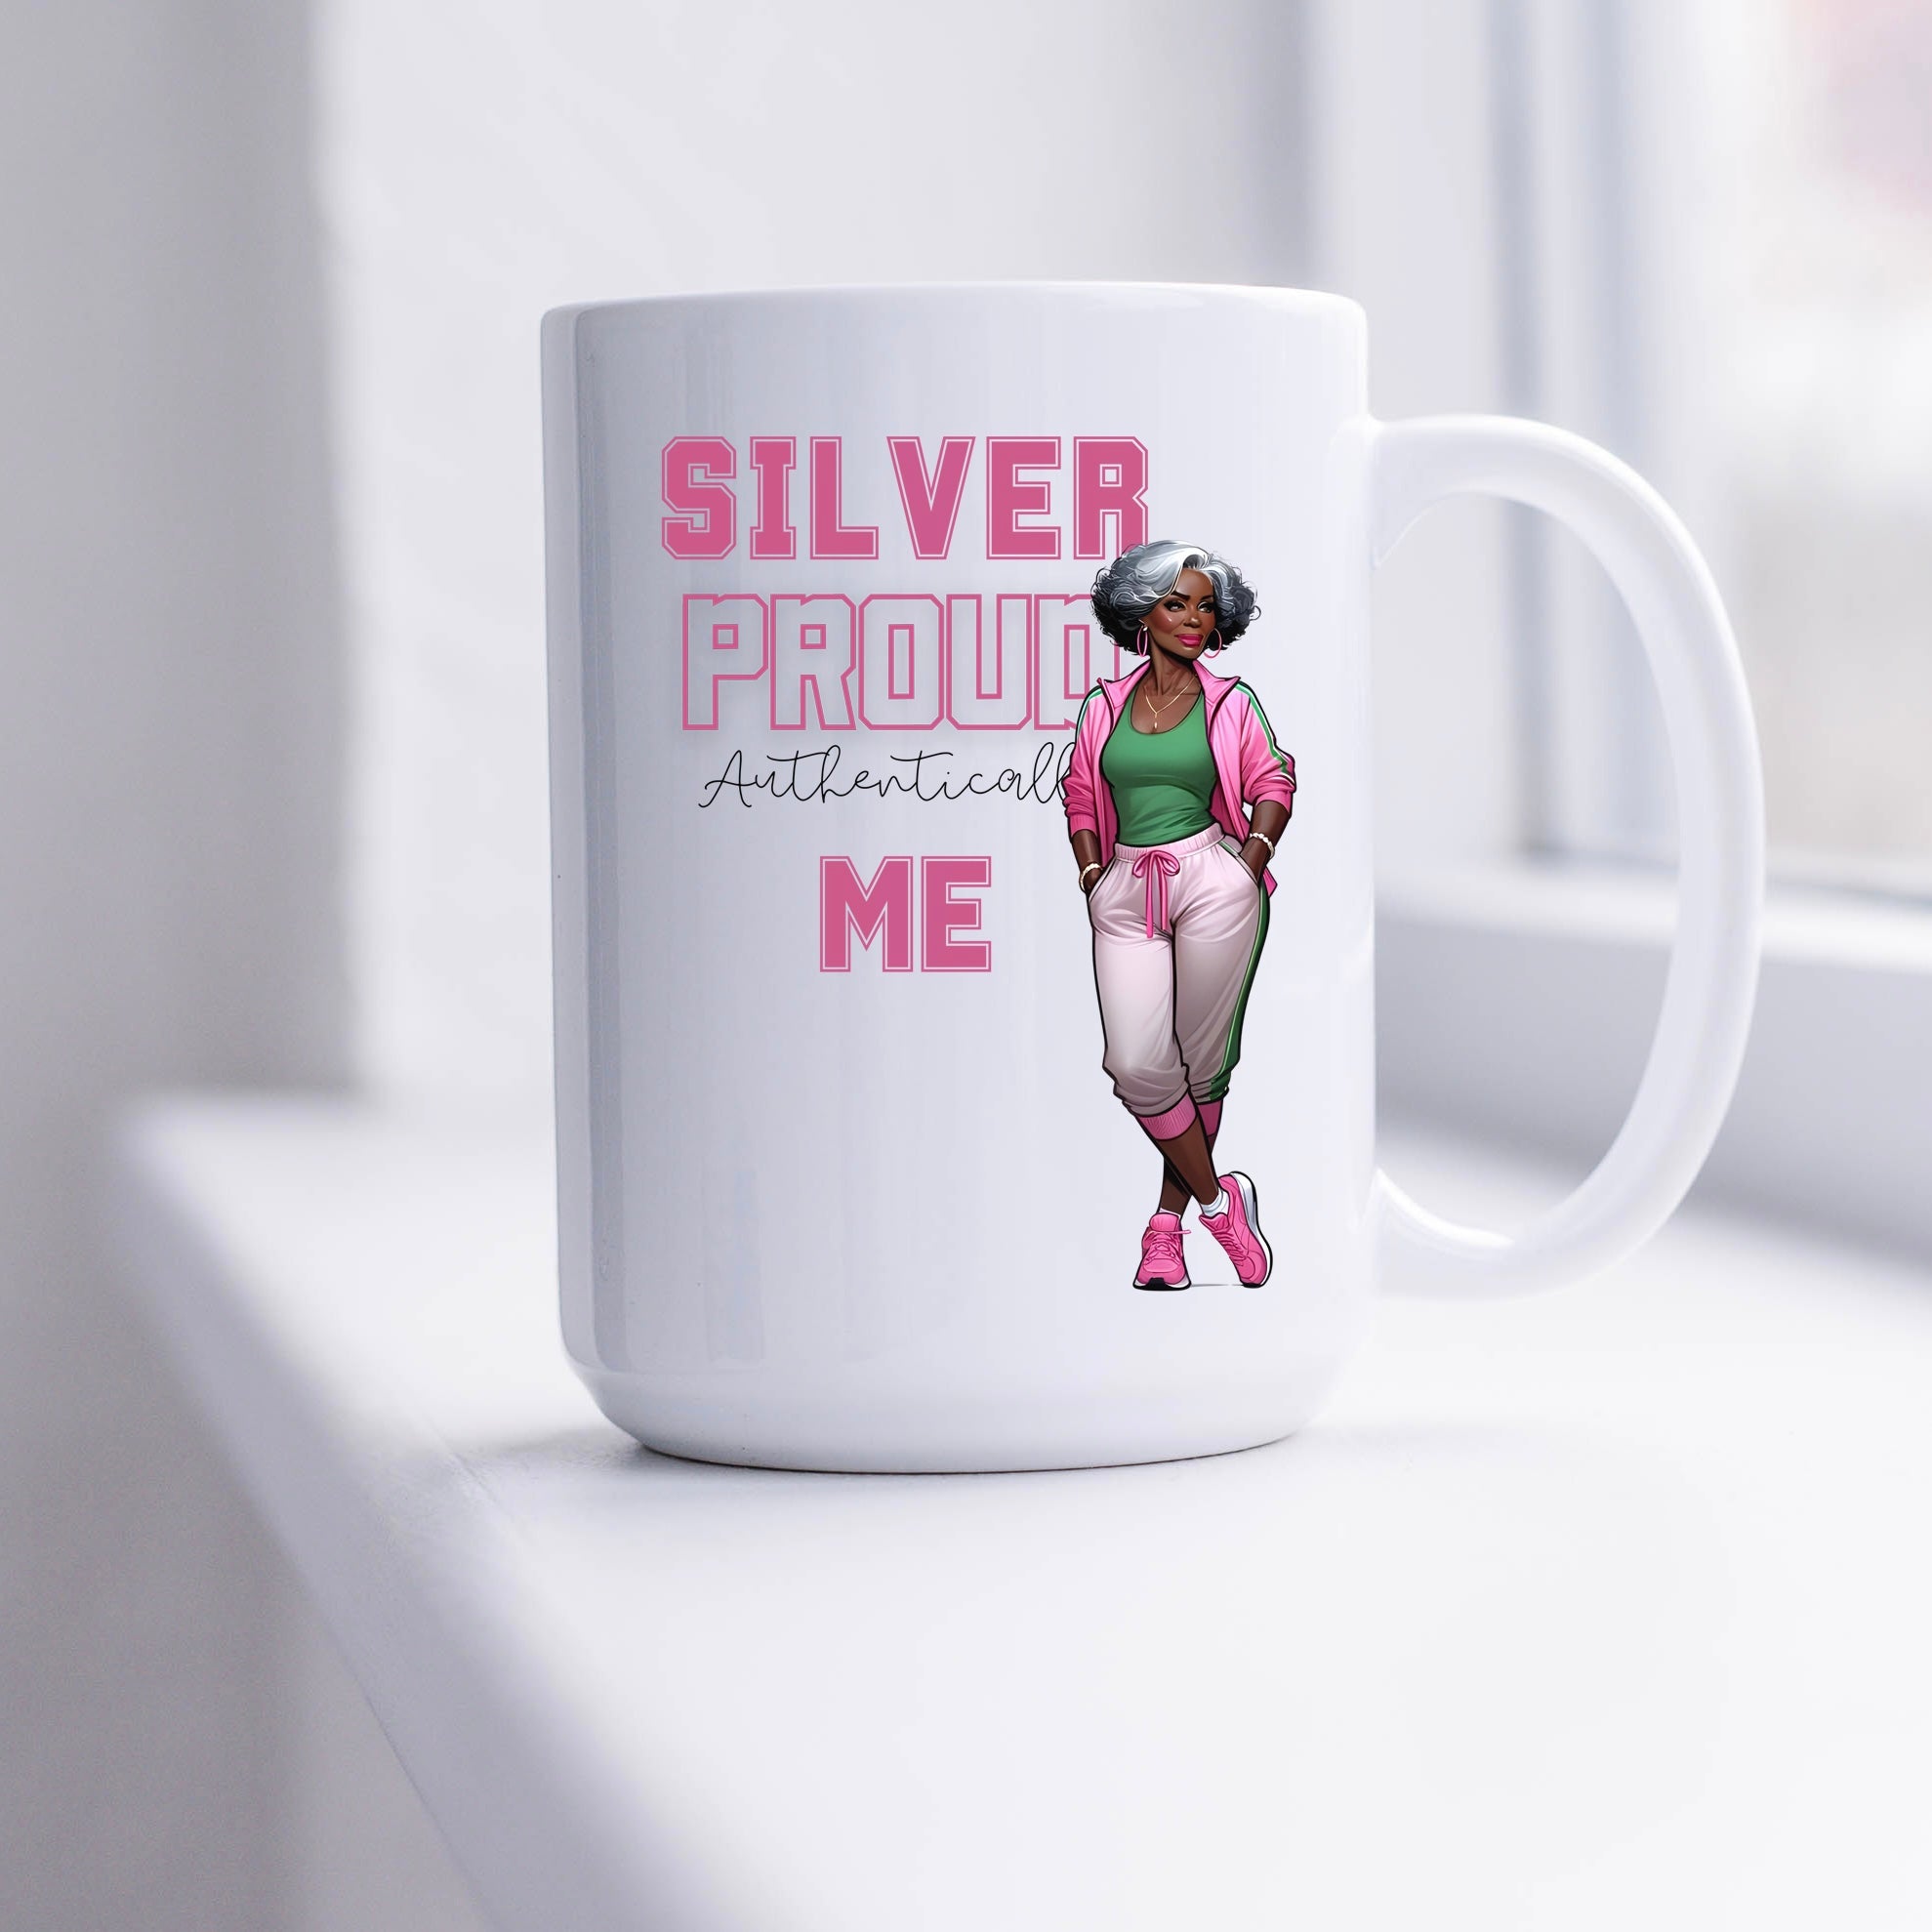 Silver Proud Authentically Me Mug